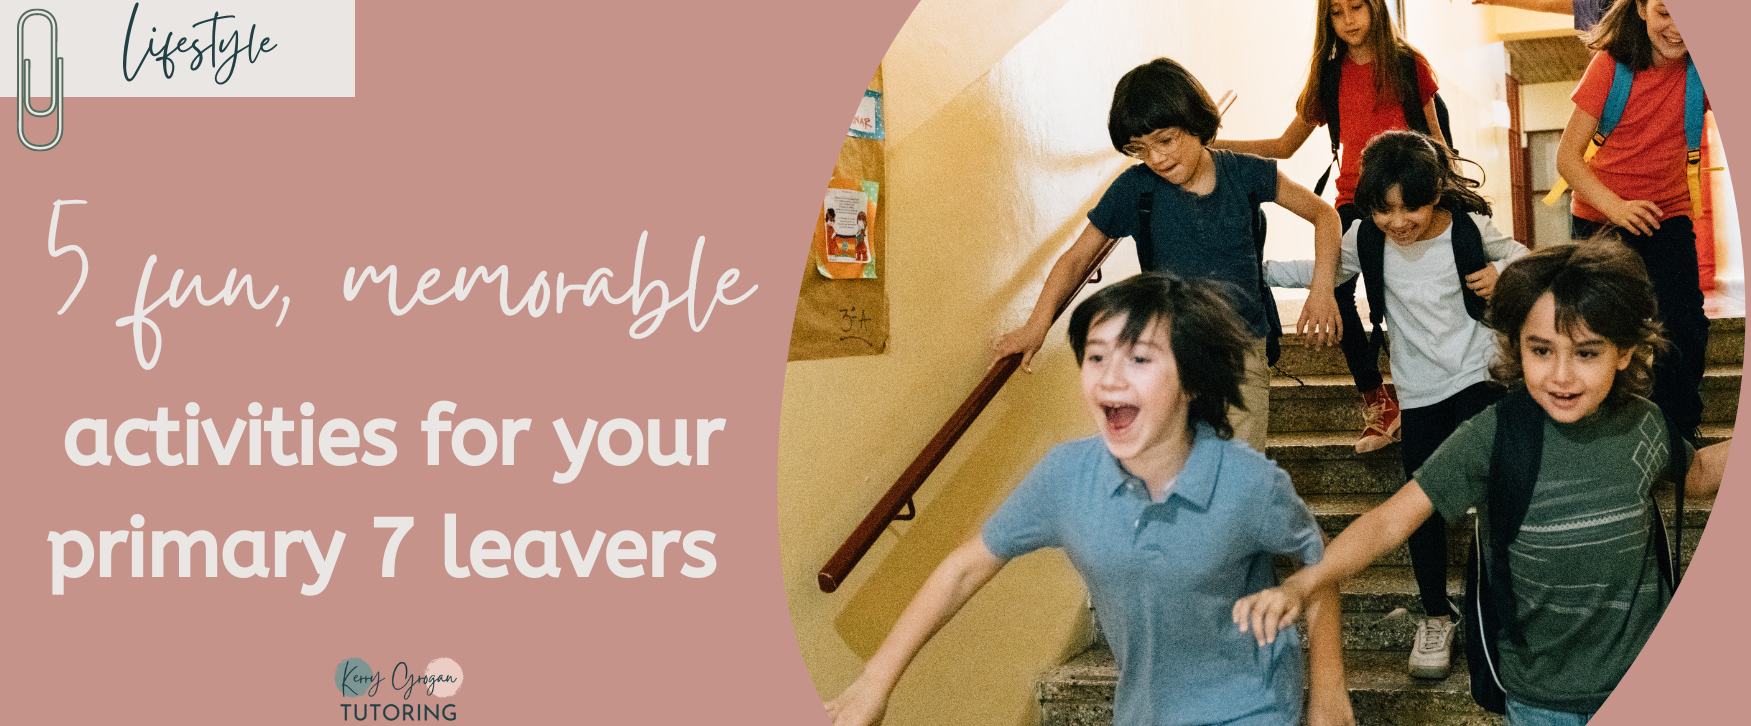 5 fun, memorable activities for your primary 7 leavers